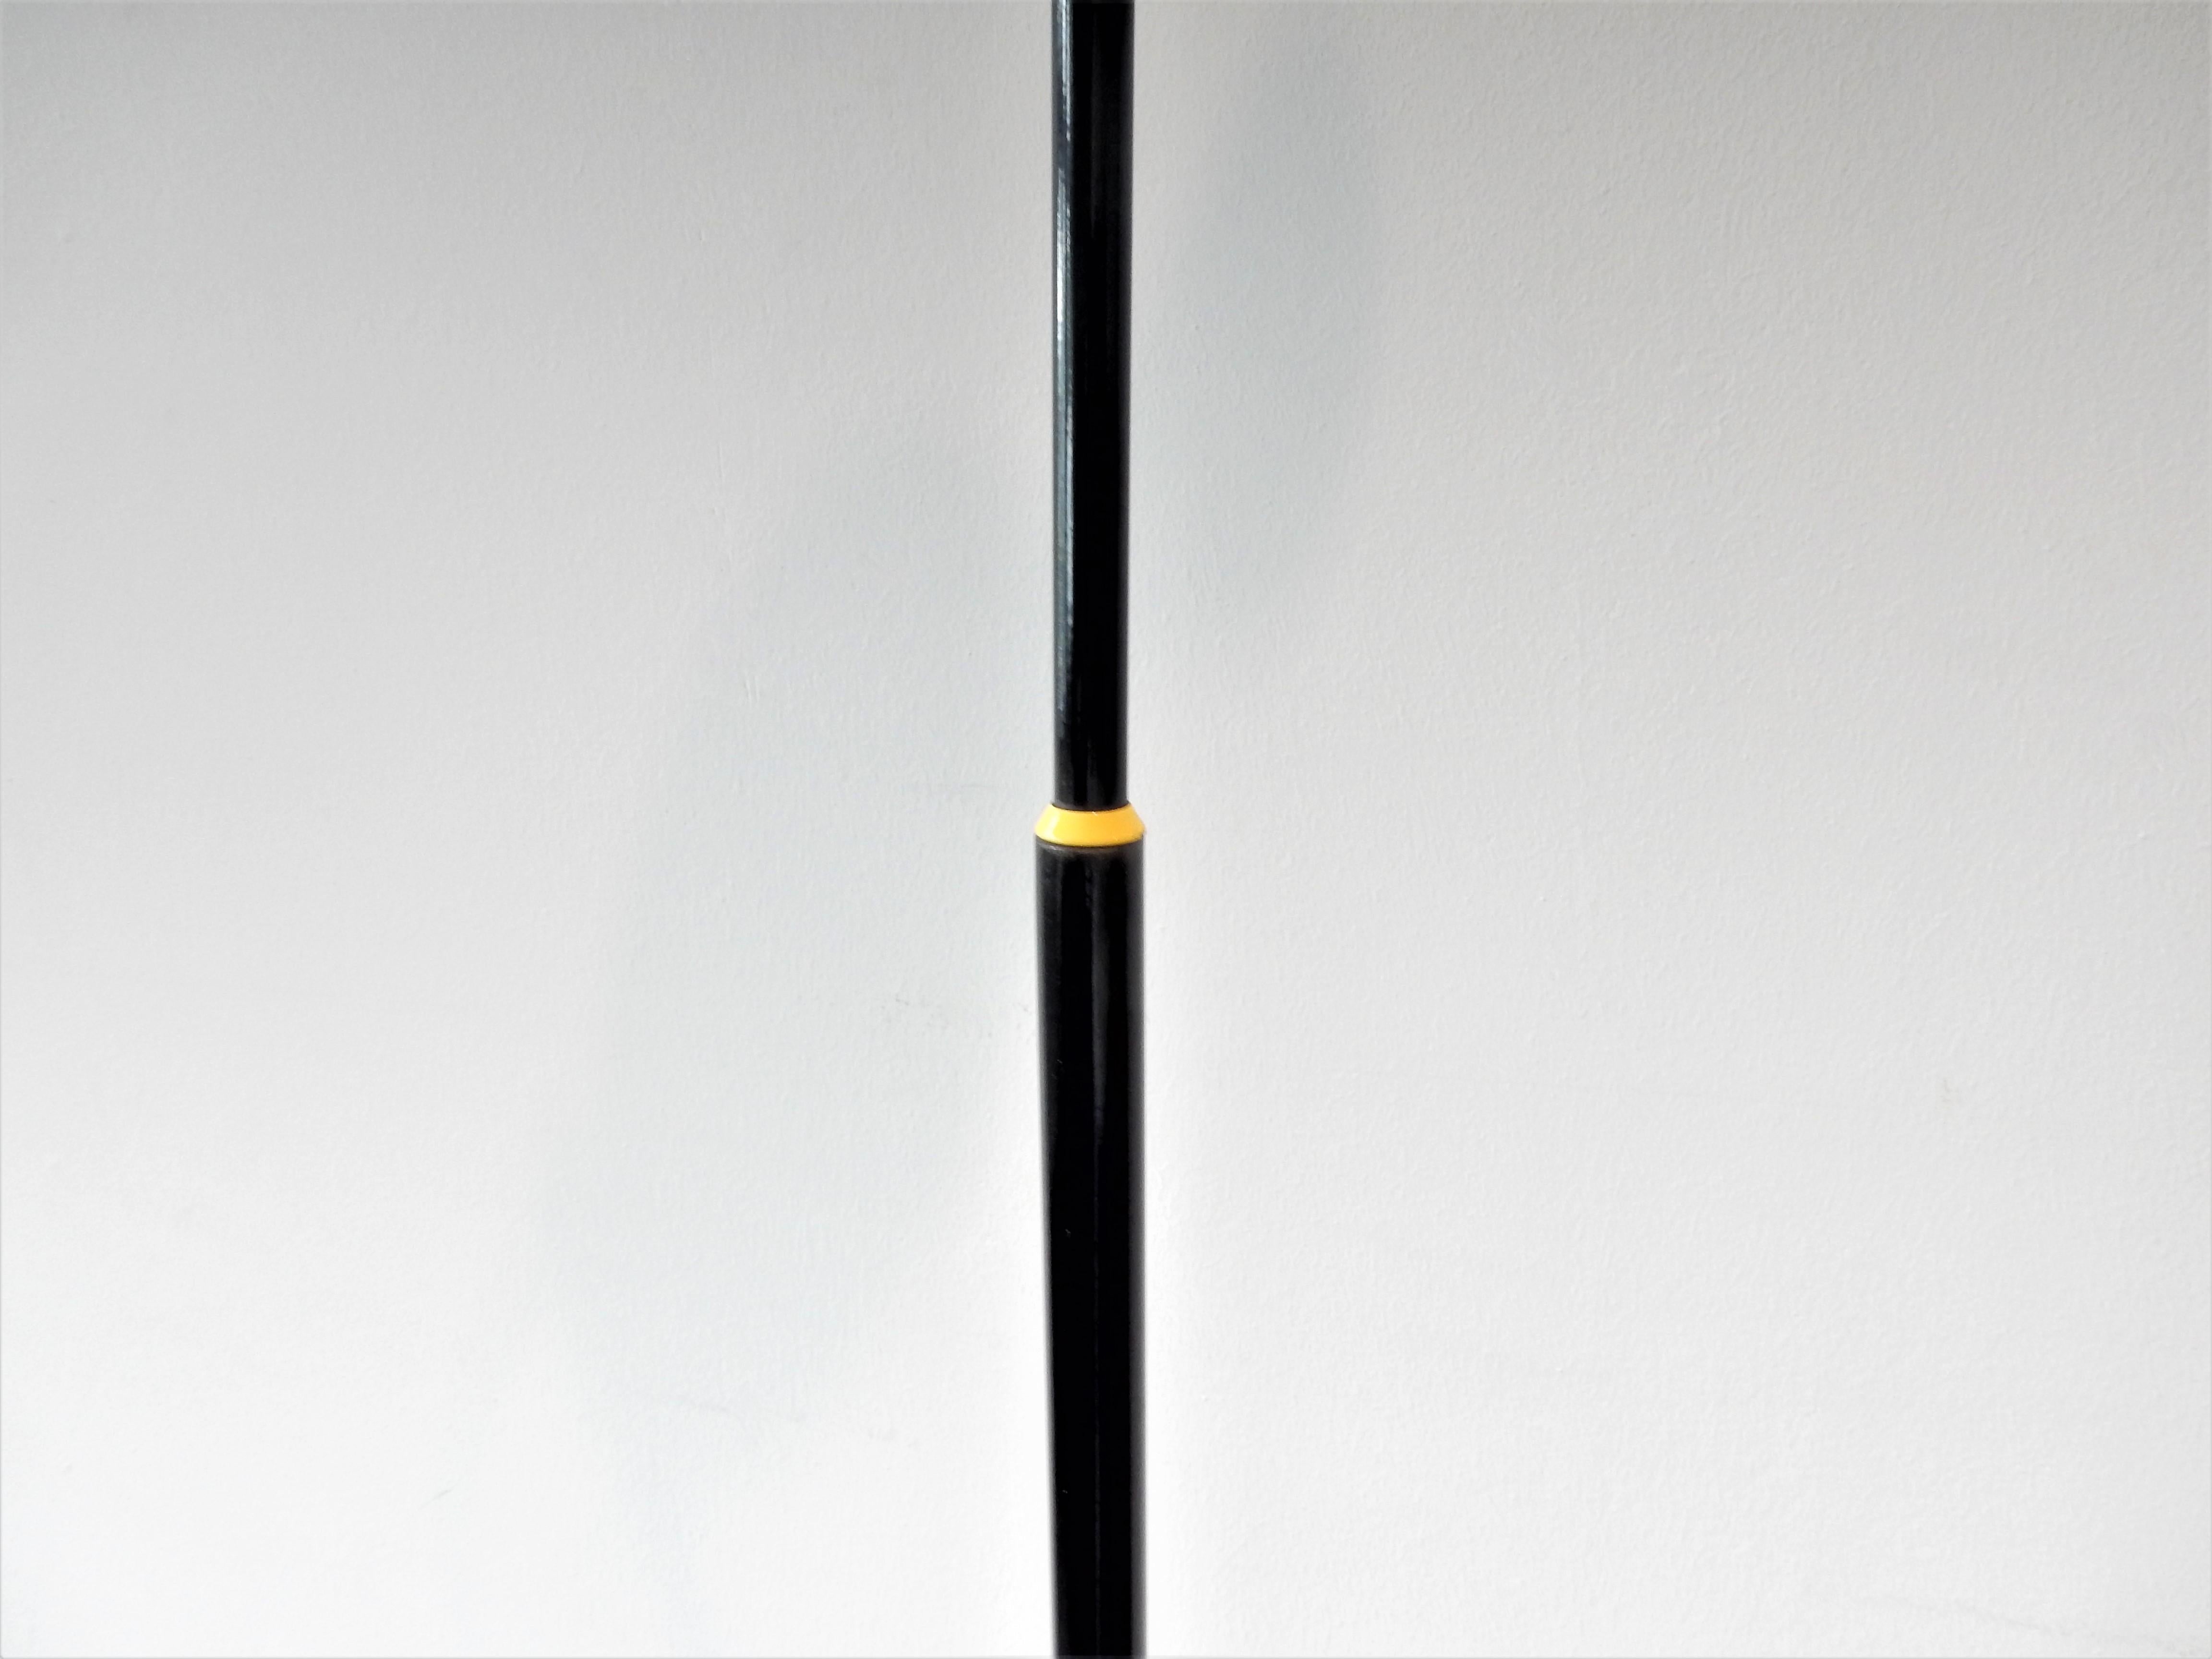 Late 20th Century Rare 'Pico' Floor Lamp by Herman Hermsen for Designum, the Netherlands, 1980s For Sale